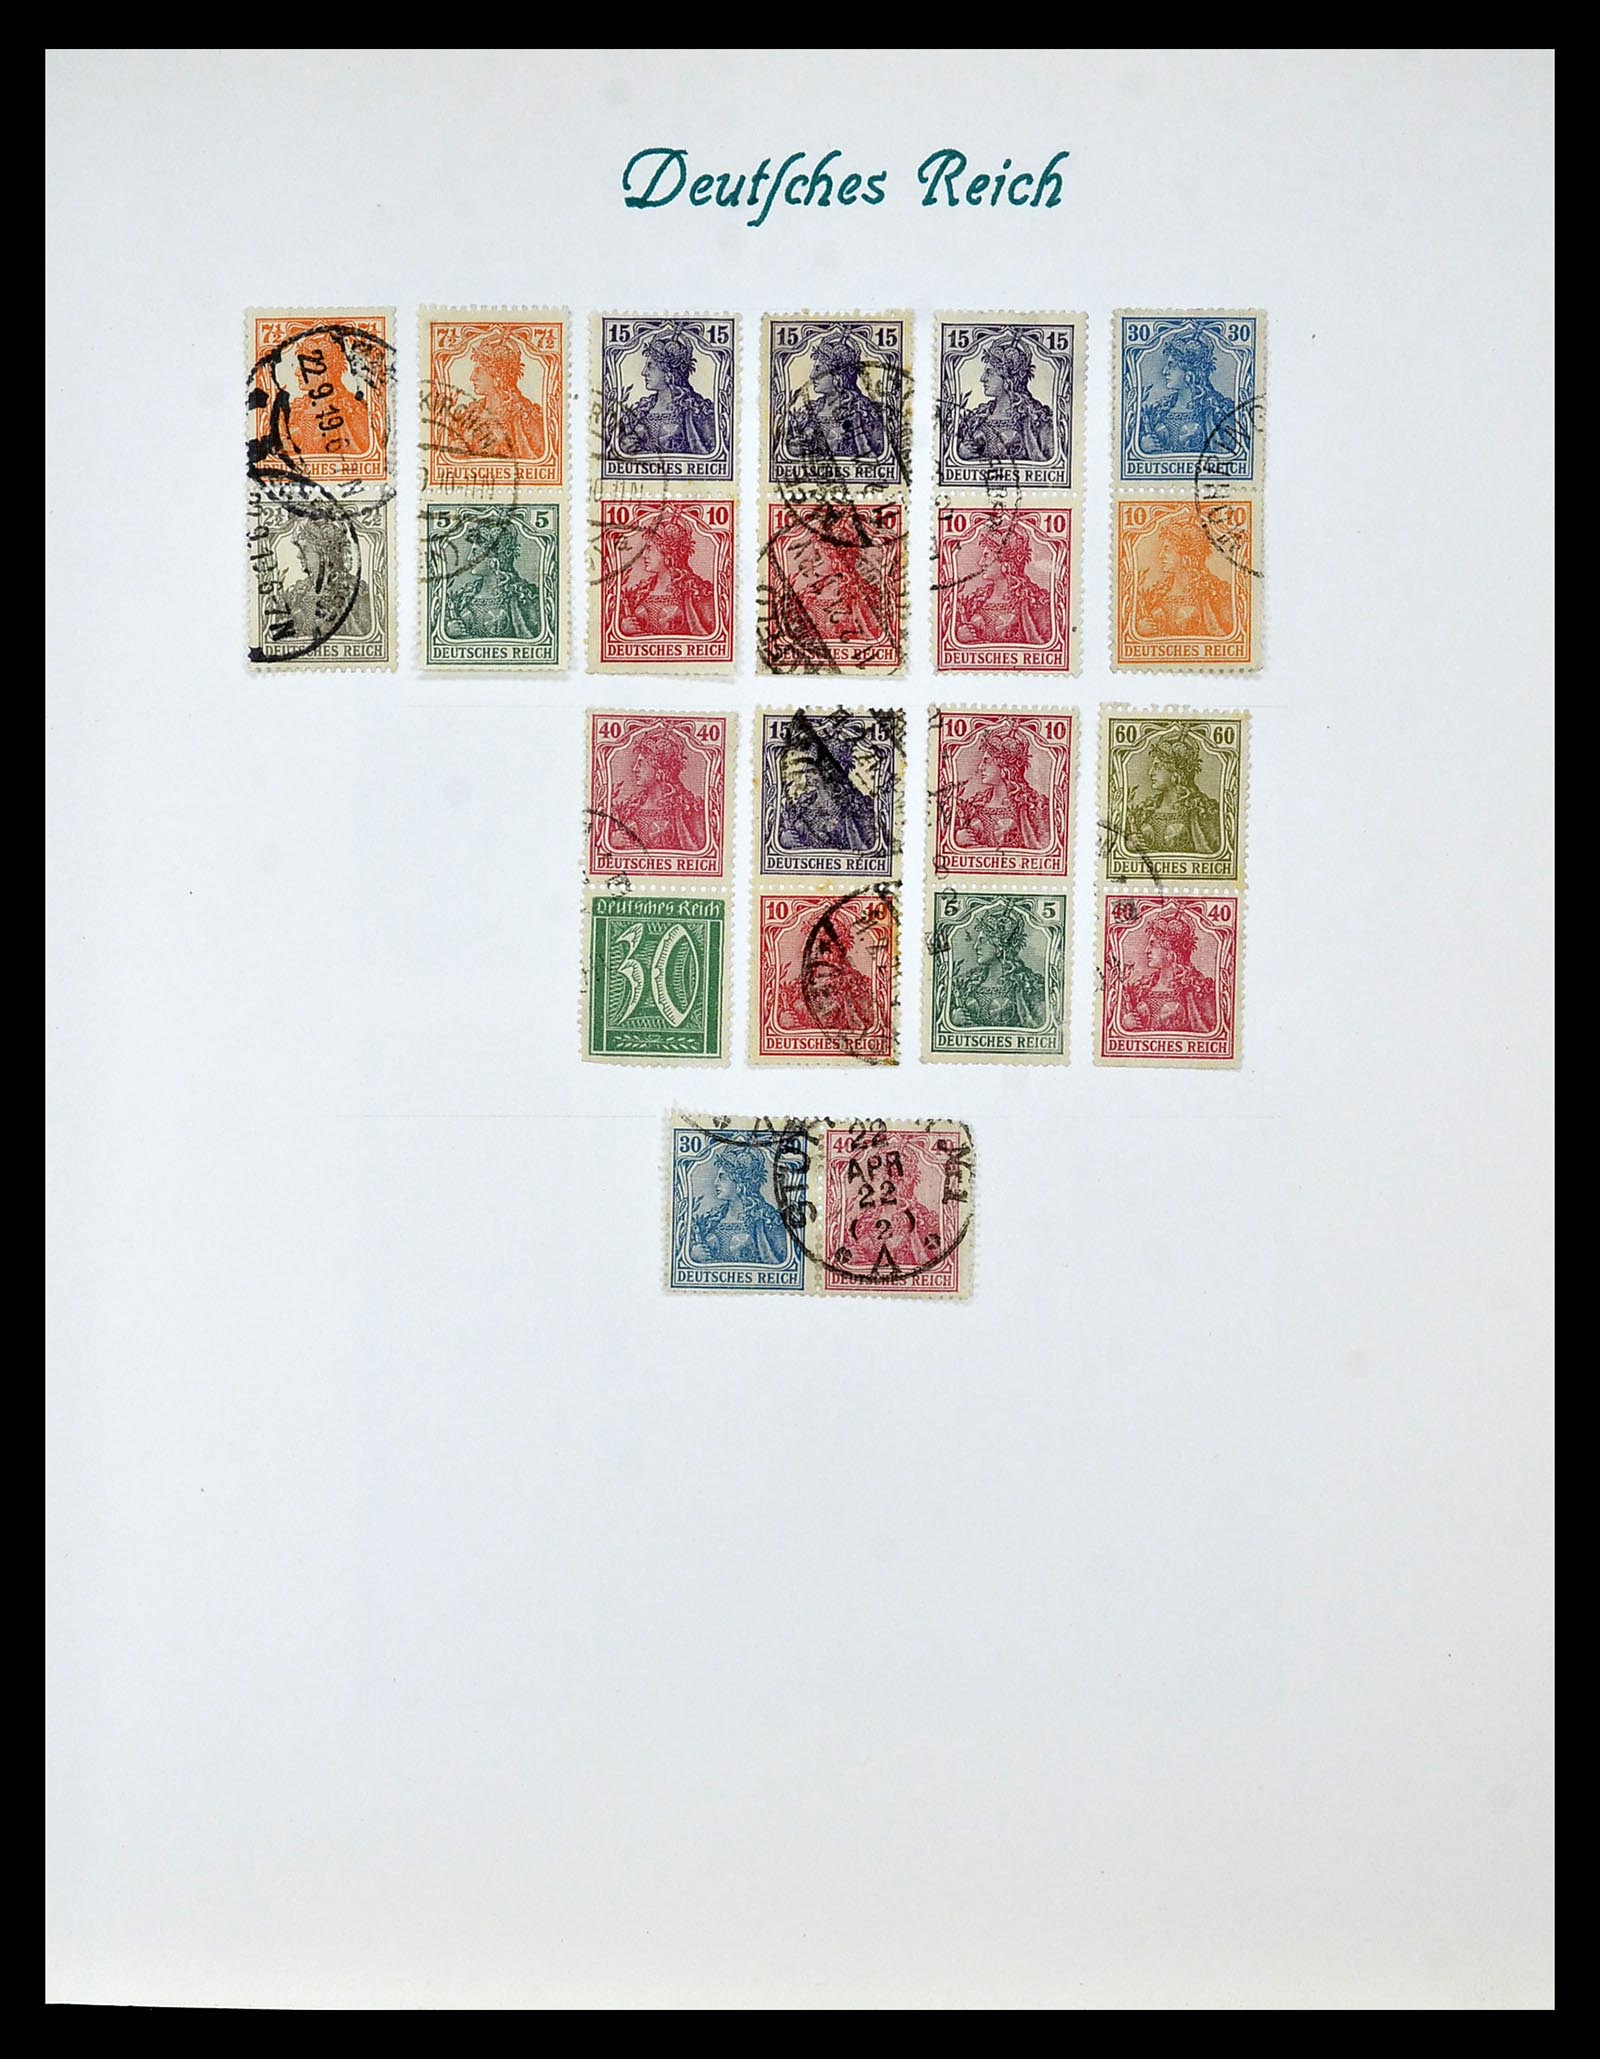 35039 007 - Stamp Collection 35039 German Reich combinations 1910-1941.